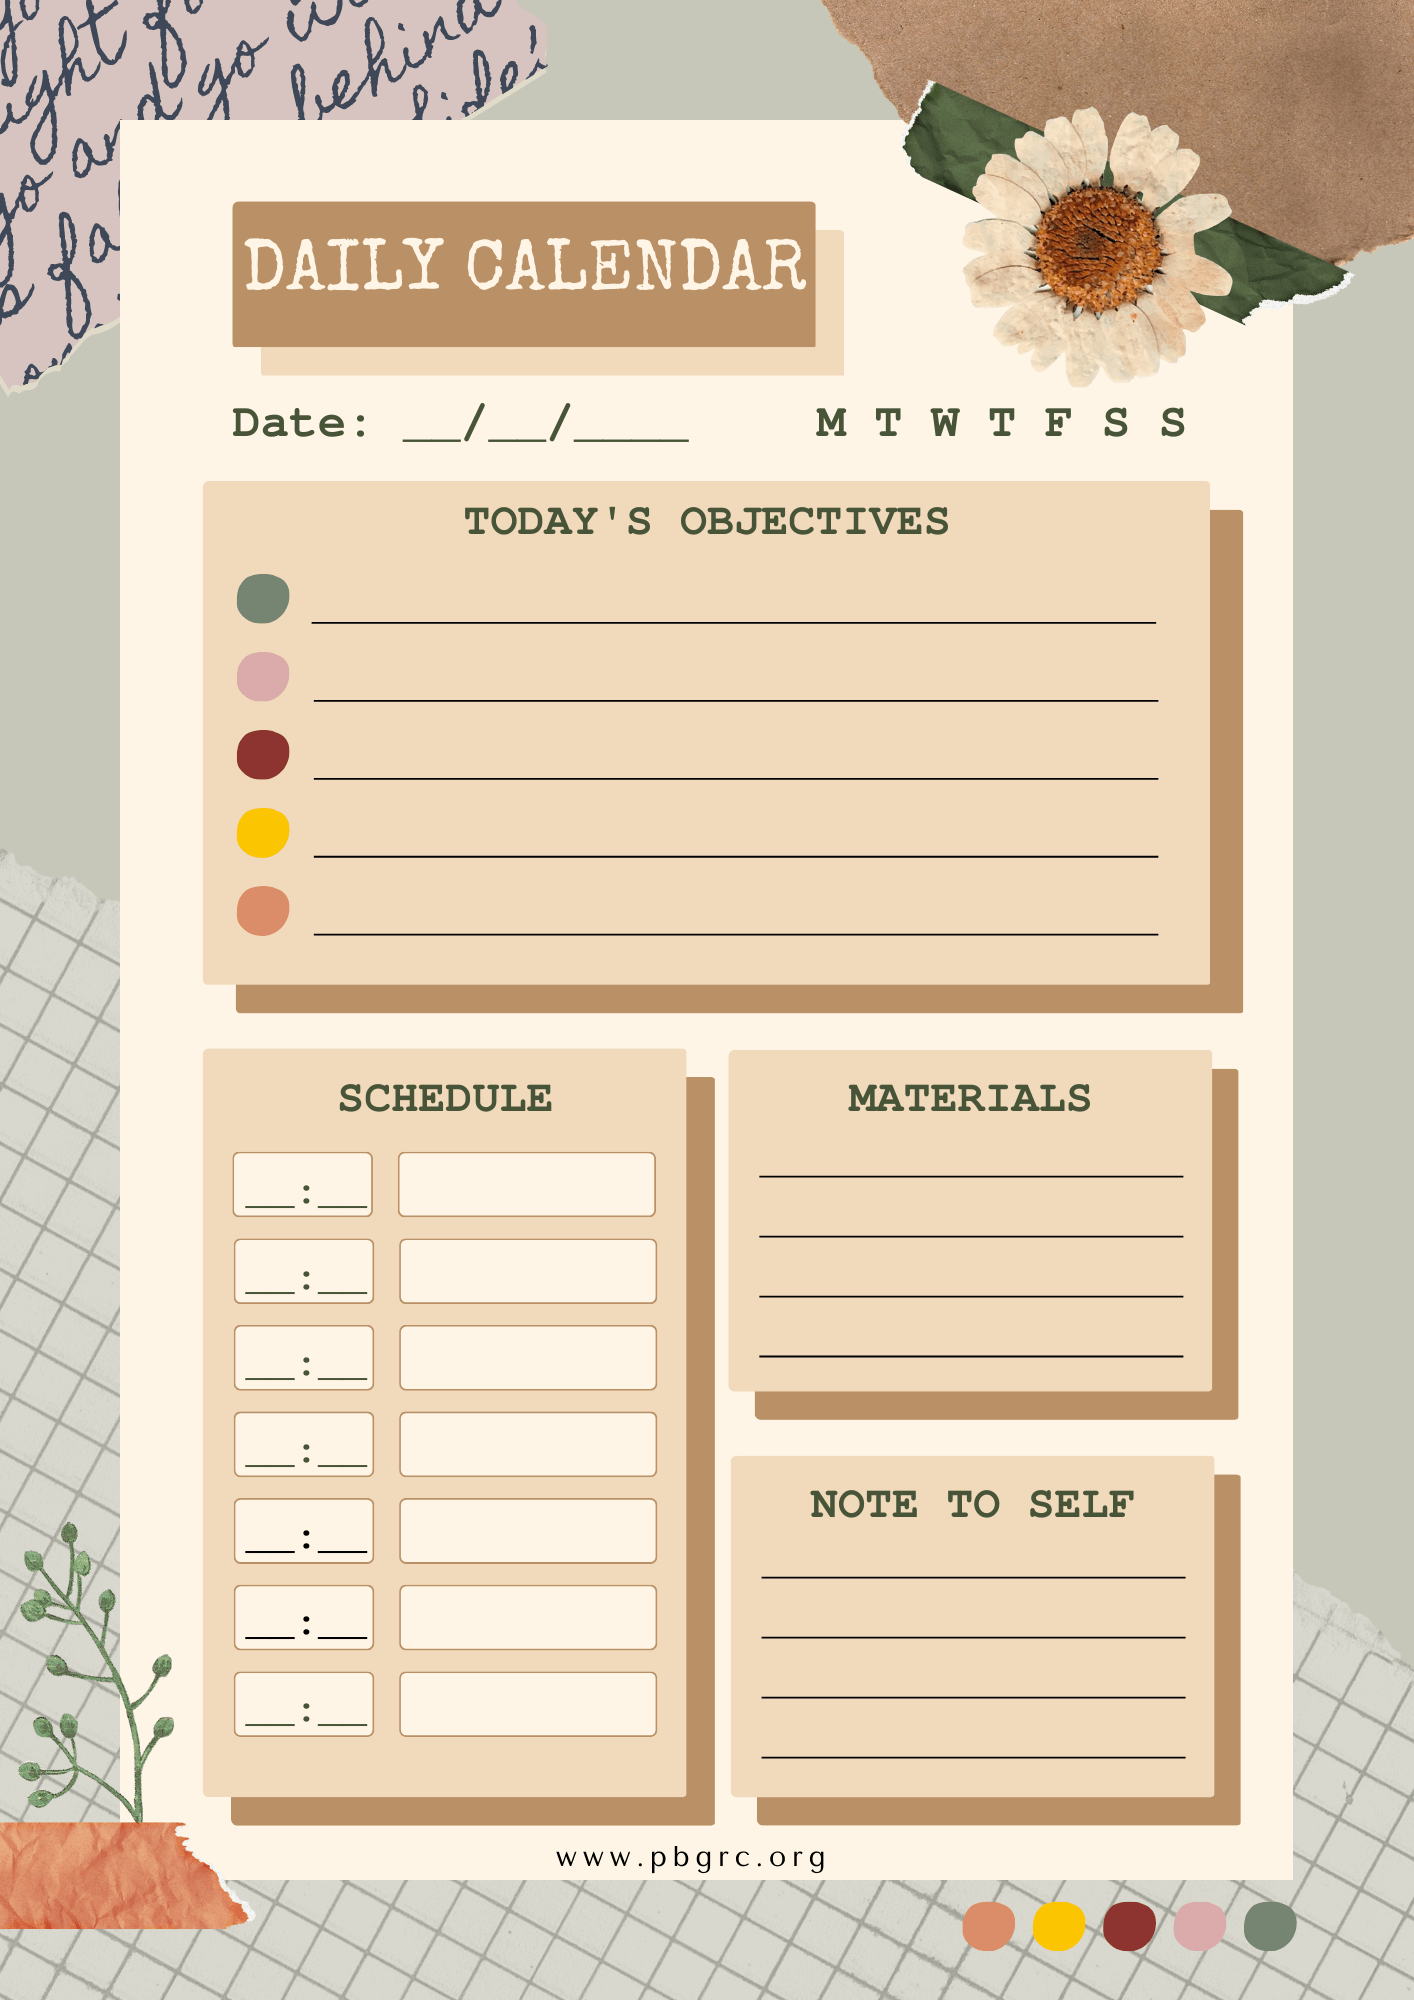 Free Printable Daily Calendar Template in PDF Format